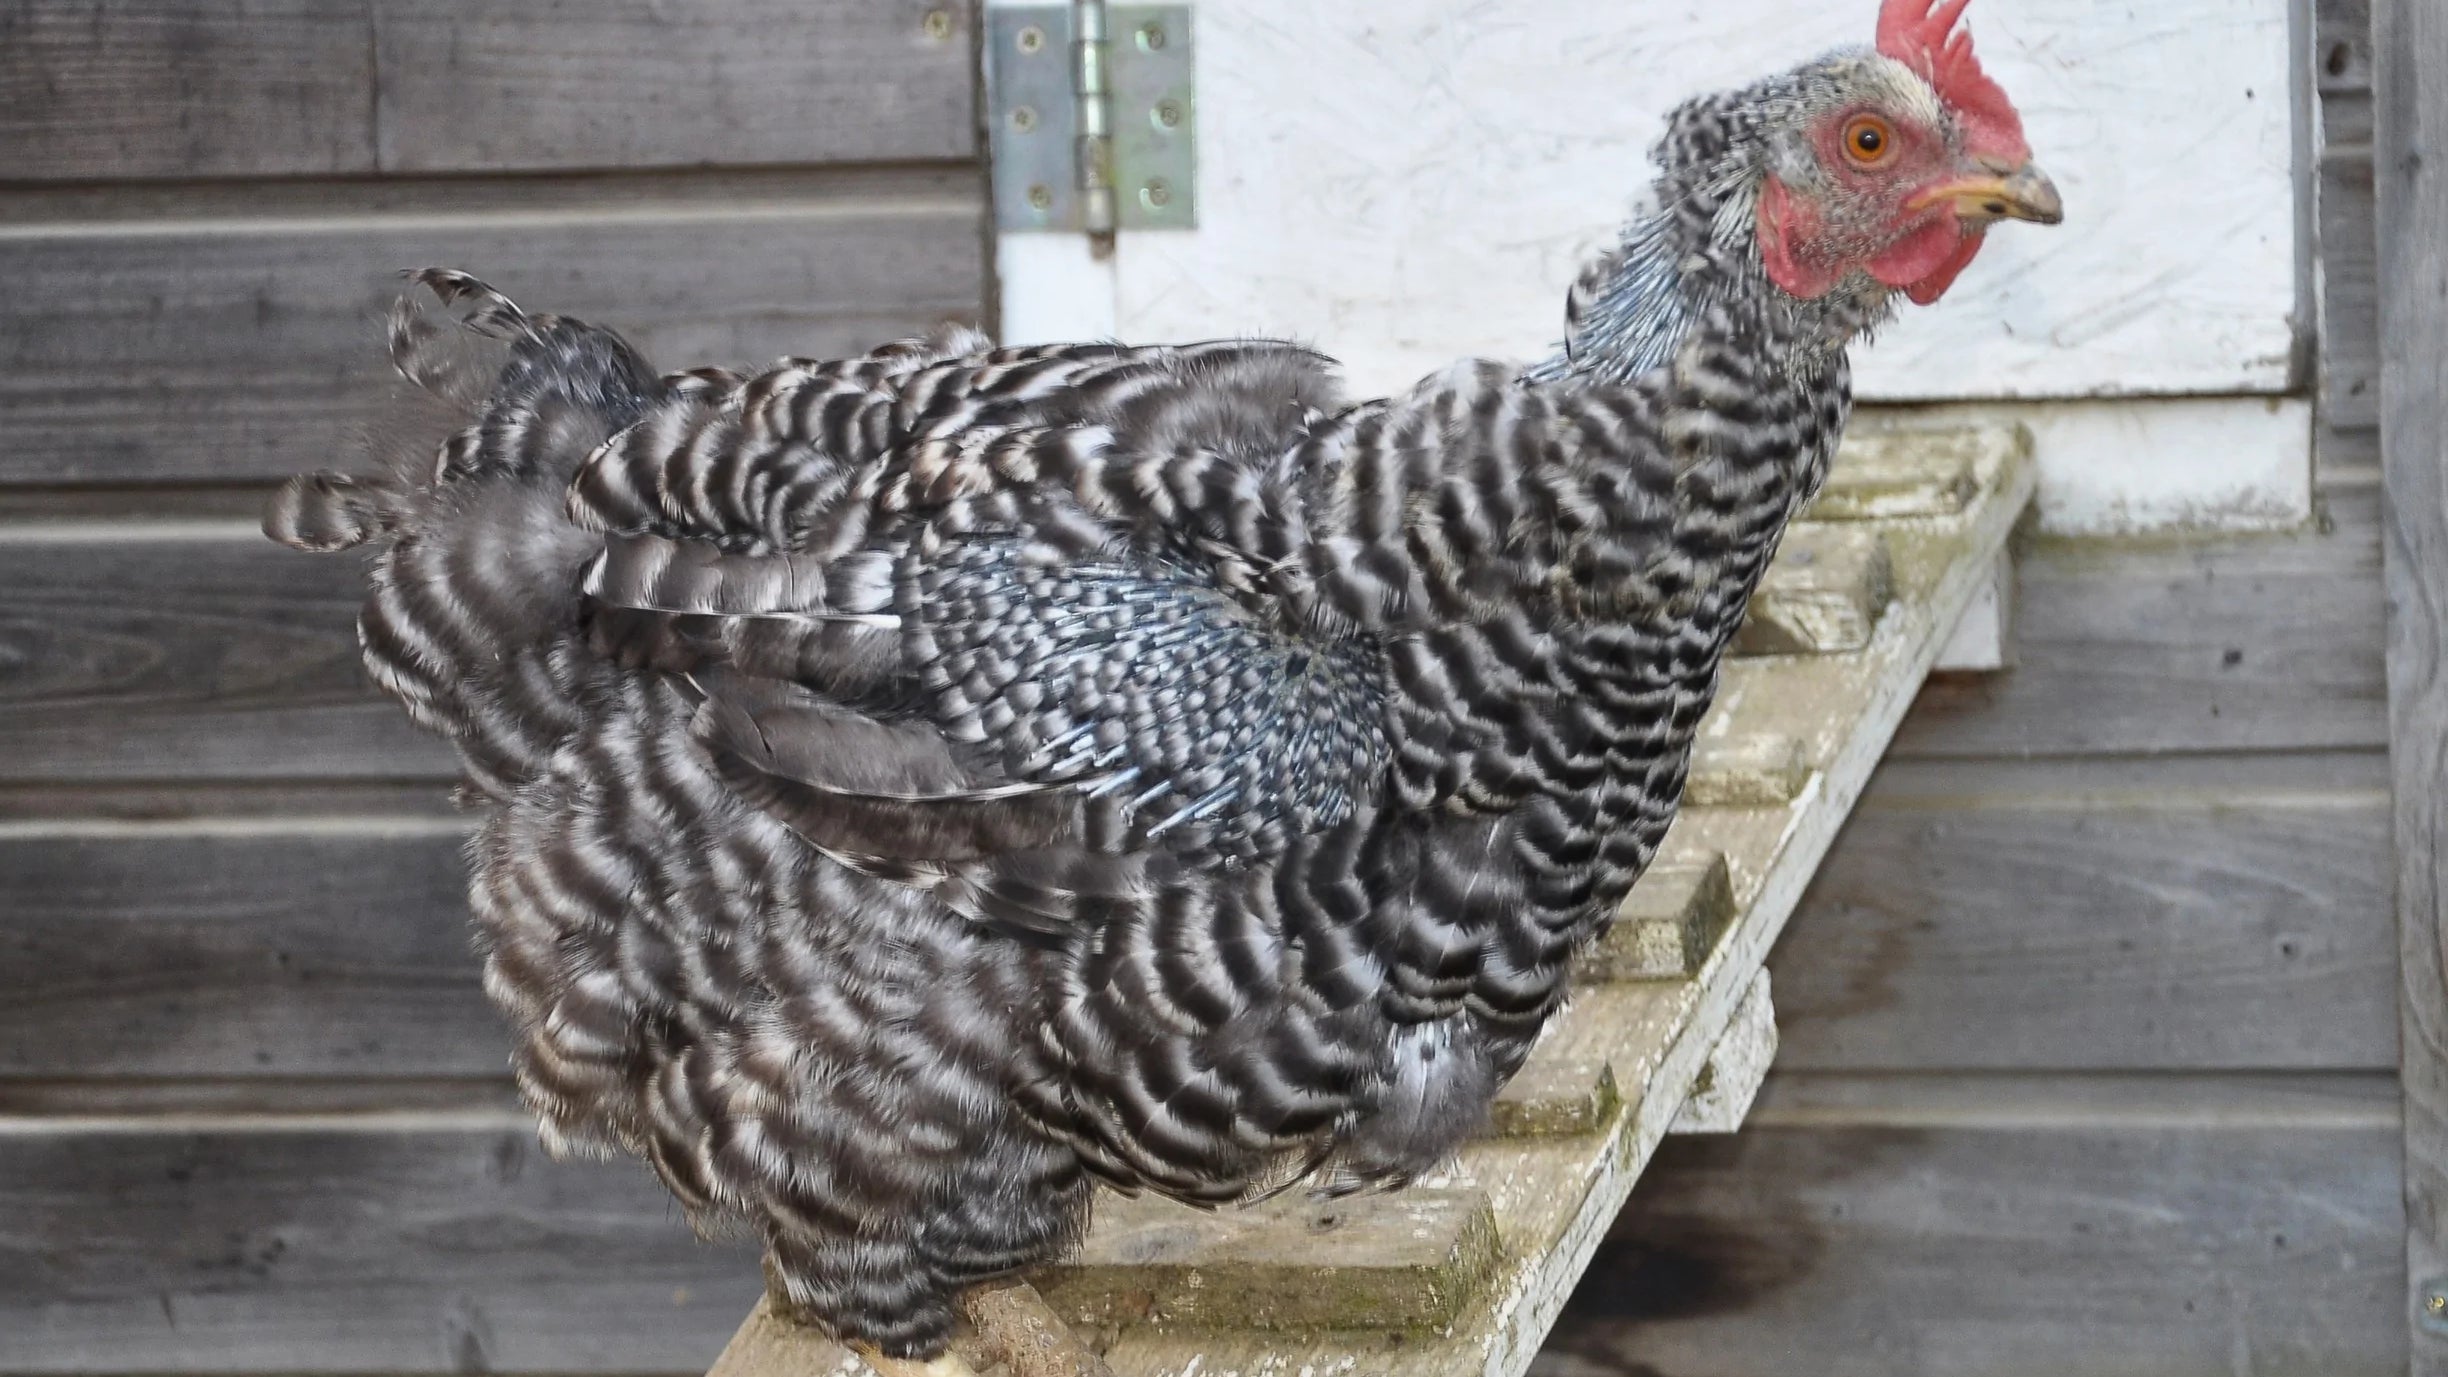 Chicken feathers are about 85% protein, so chickens need extra protein in their diet